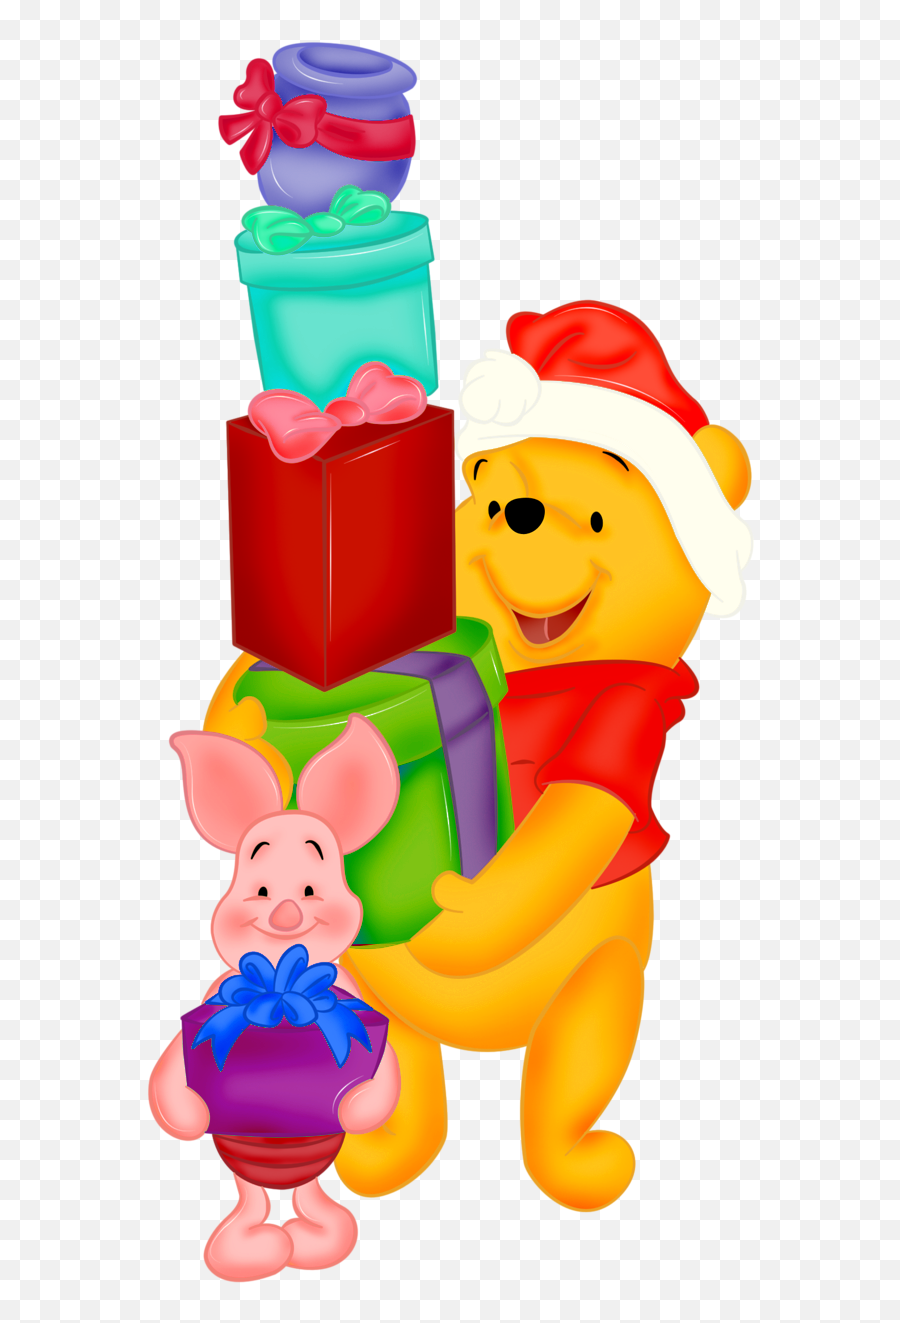 Download Santa Claus Winnie The Pooh Png Image With No - Png,Pooh Png